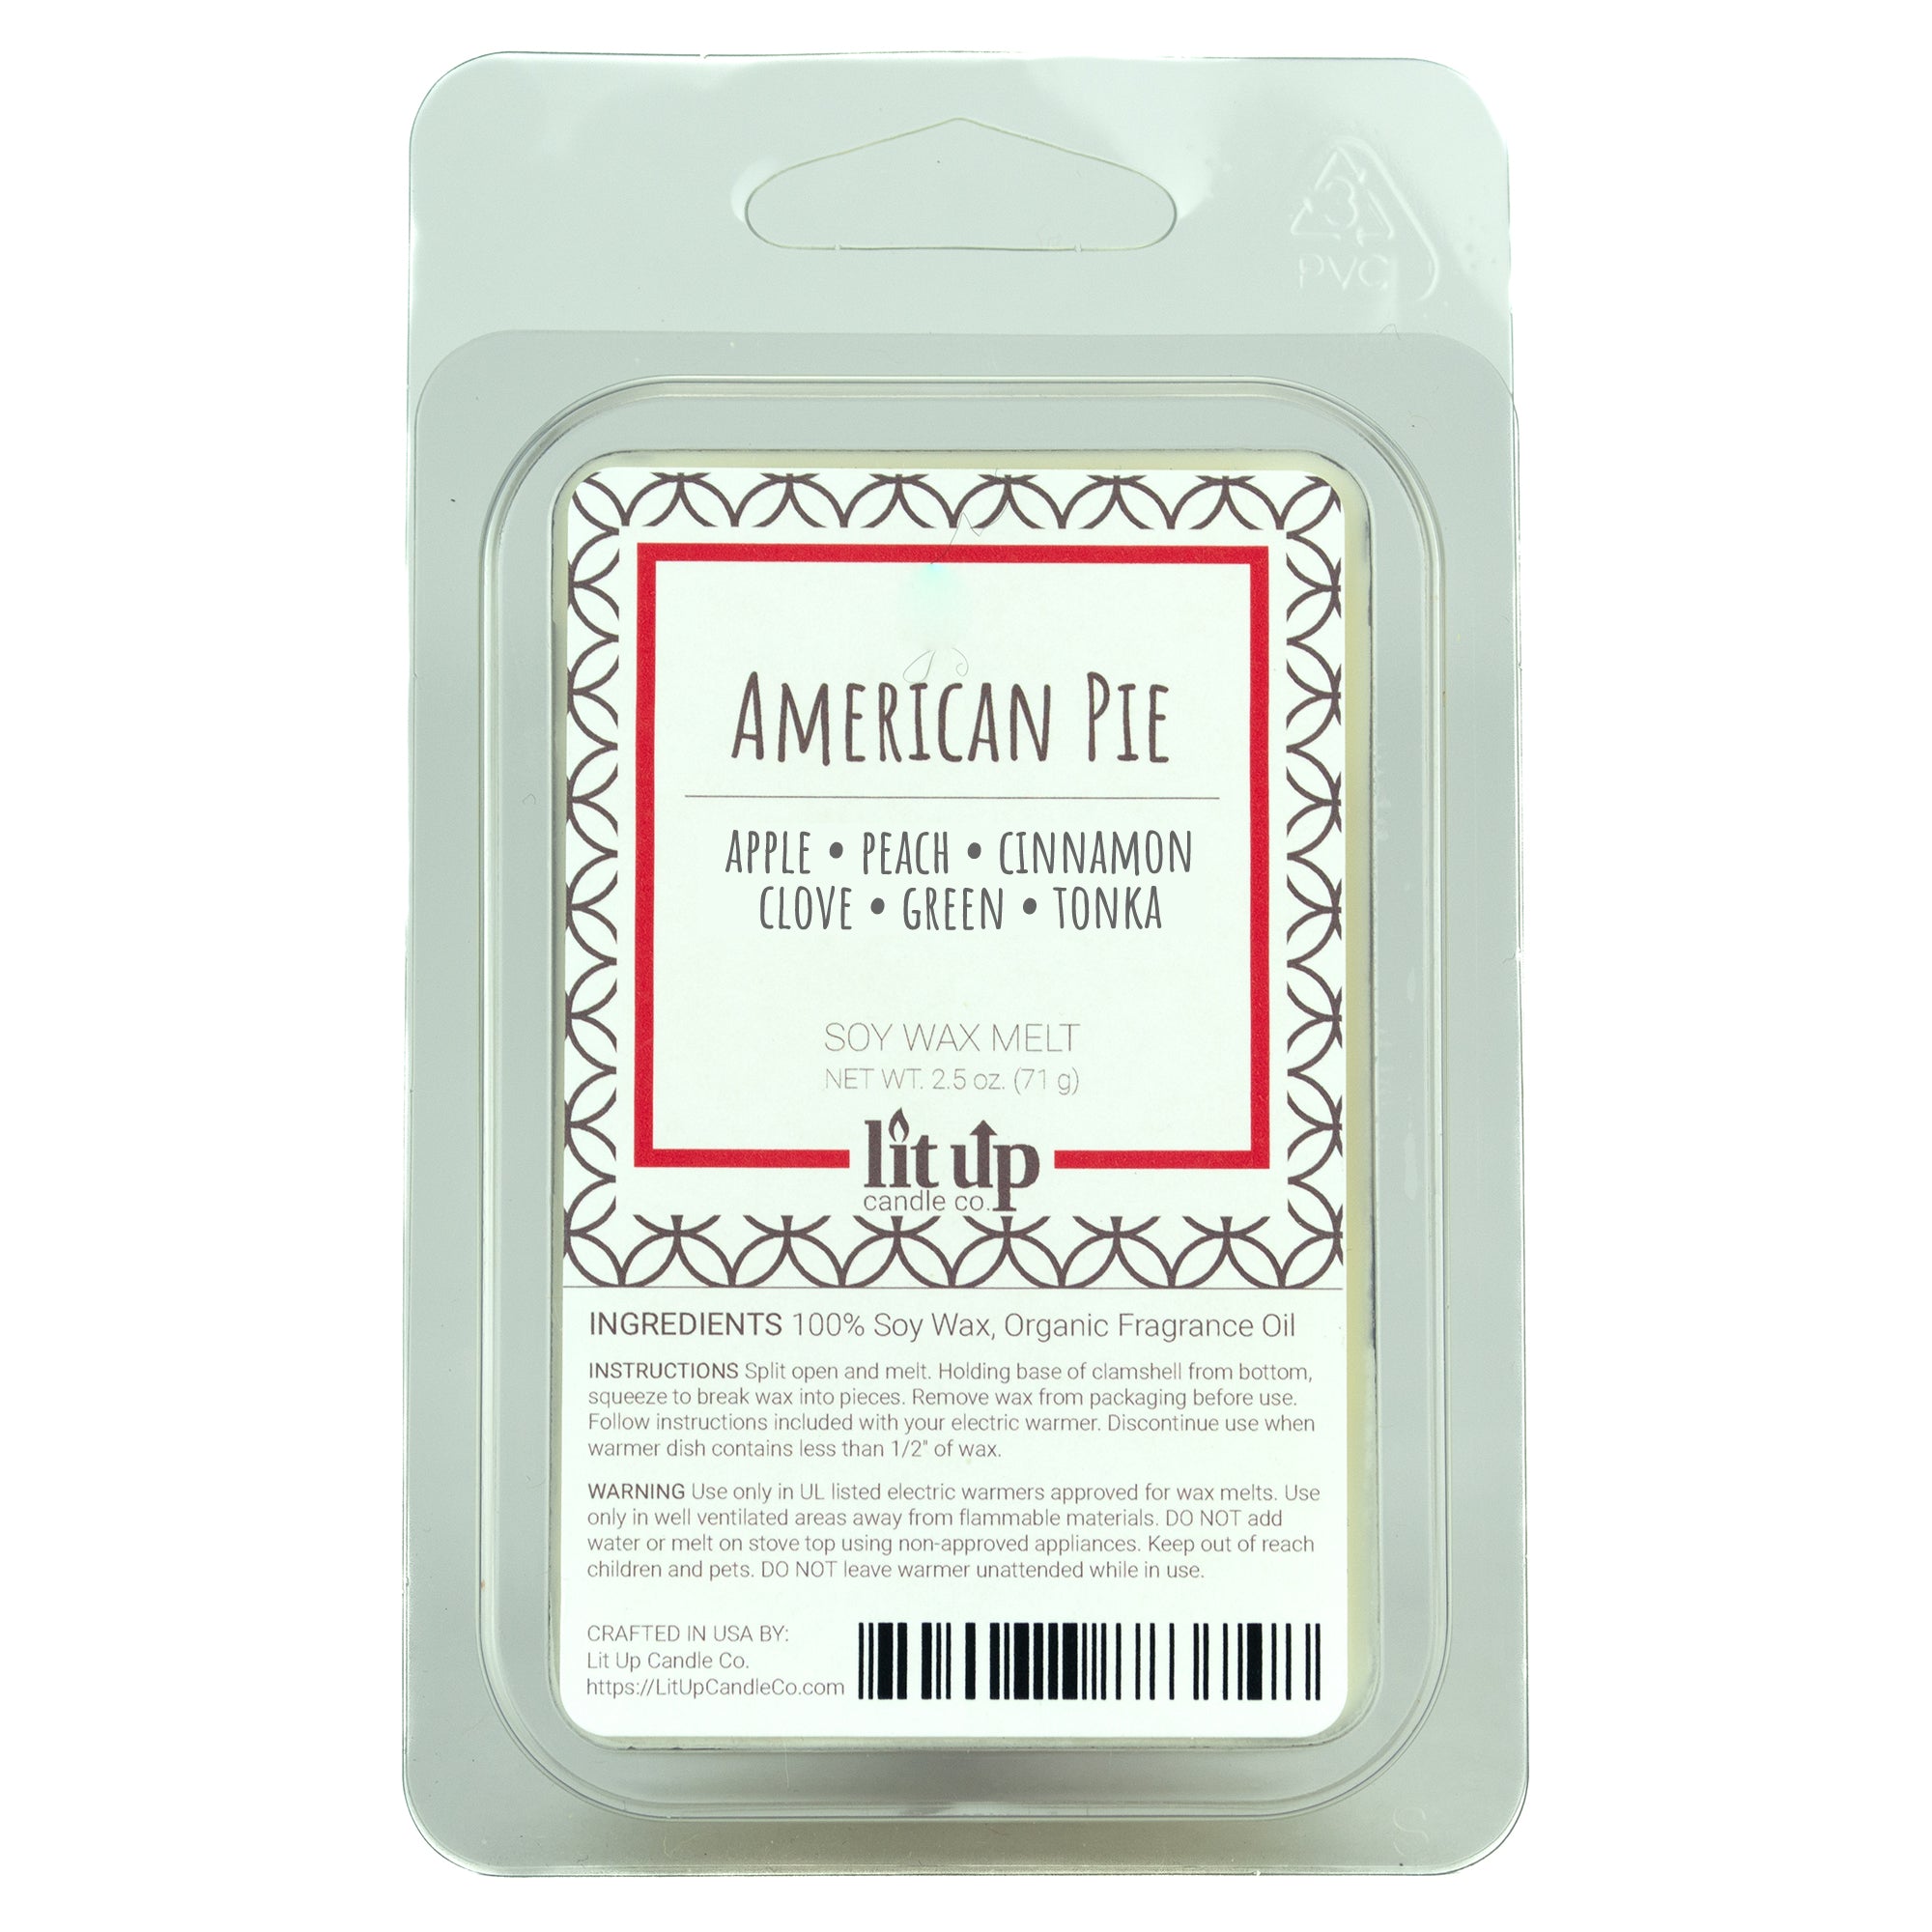 American Pie scented 2.5 oz. soy wax melt